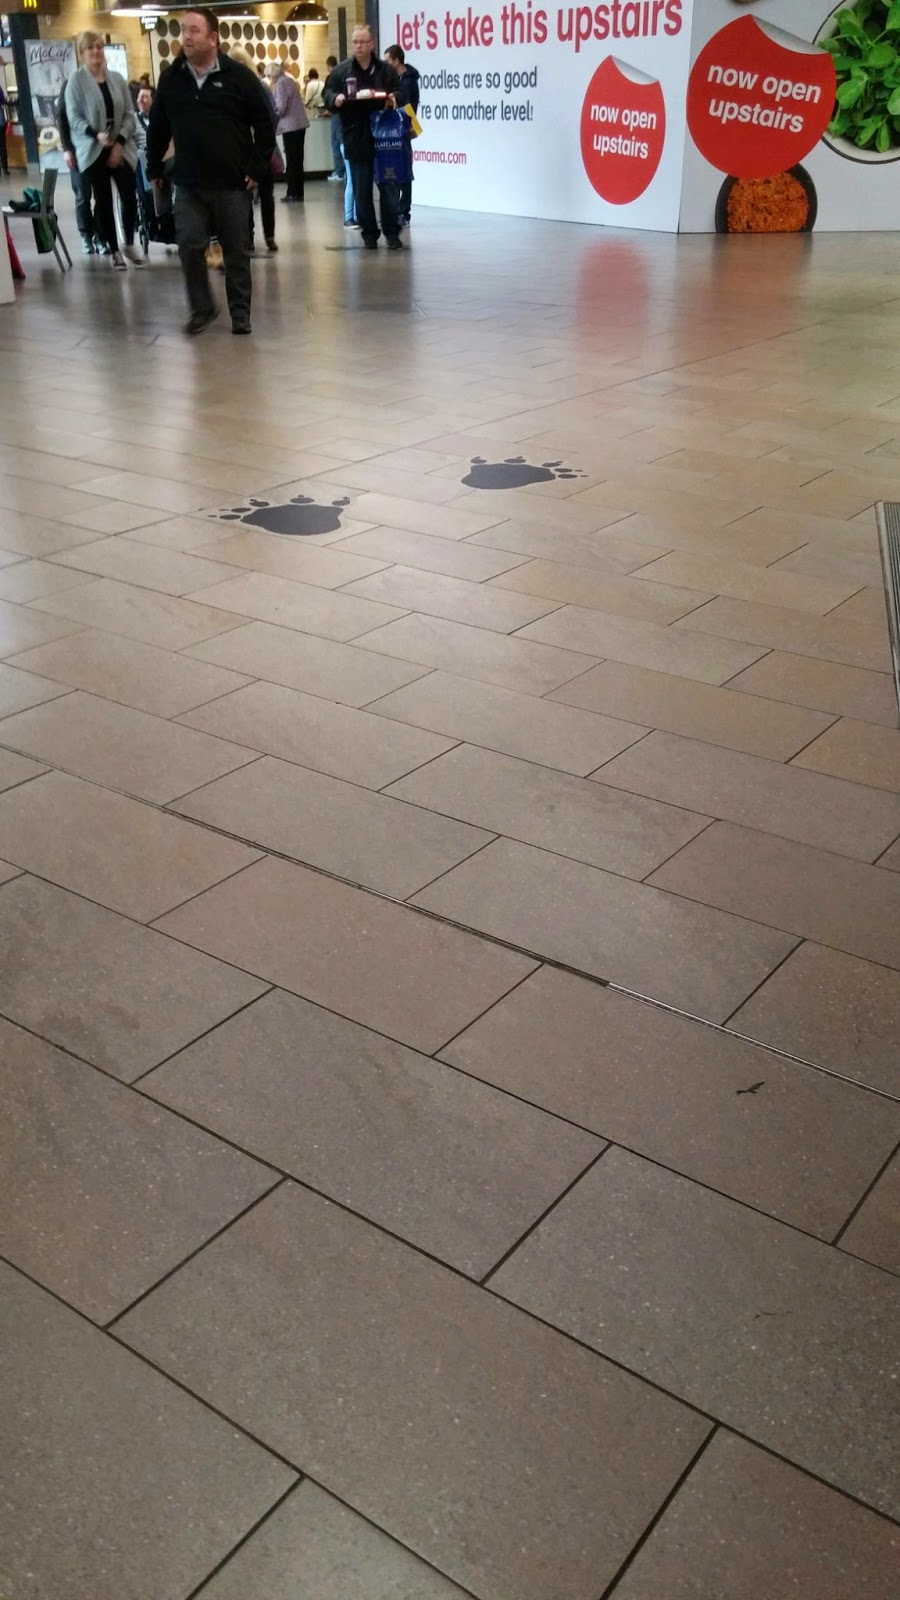 footprints in the shopping centre